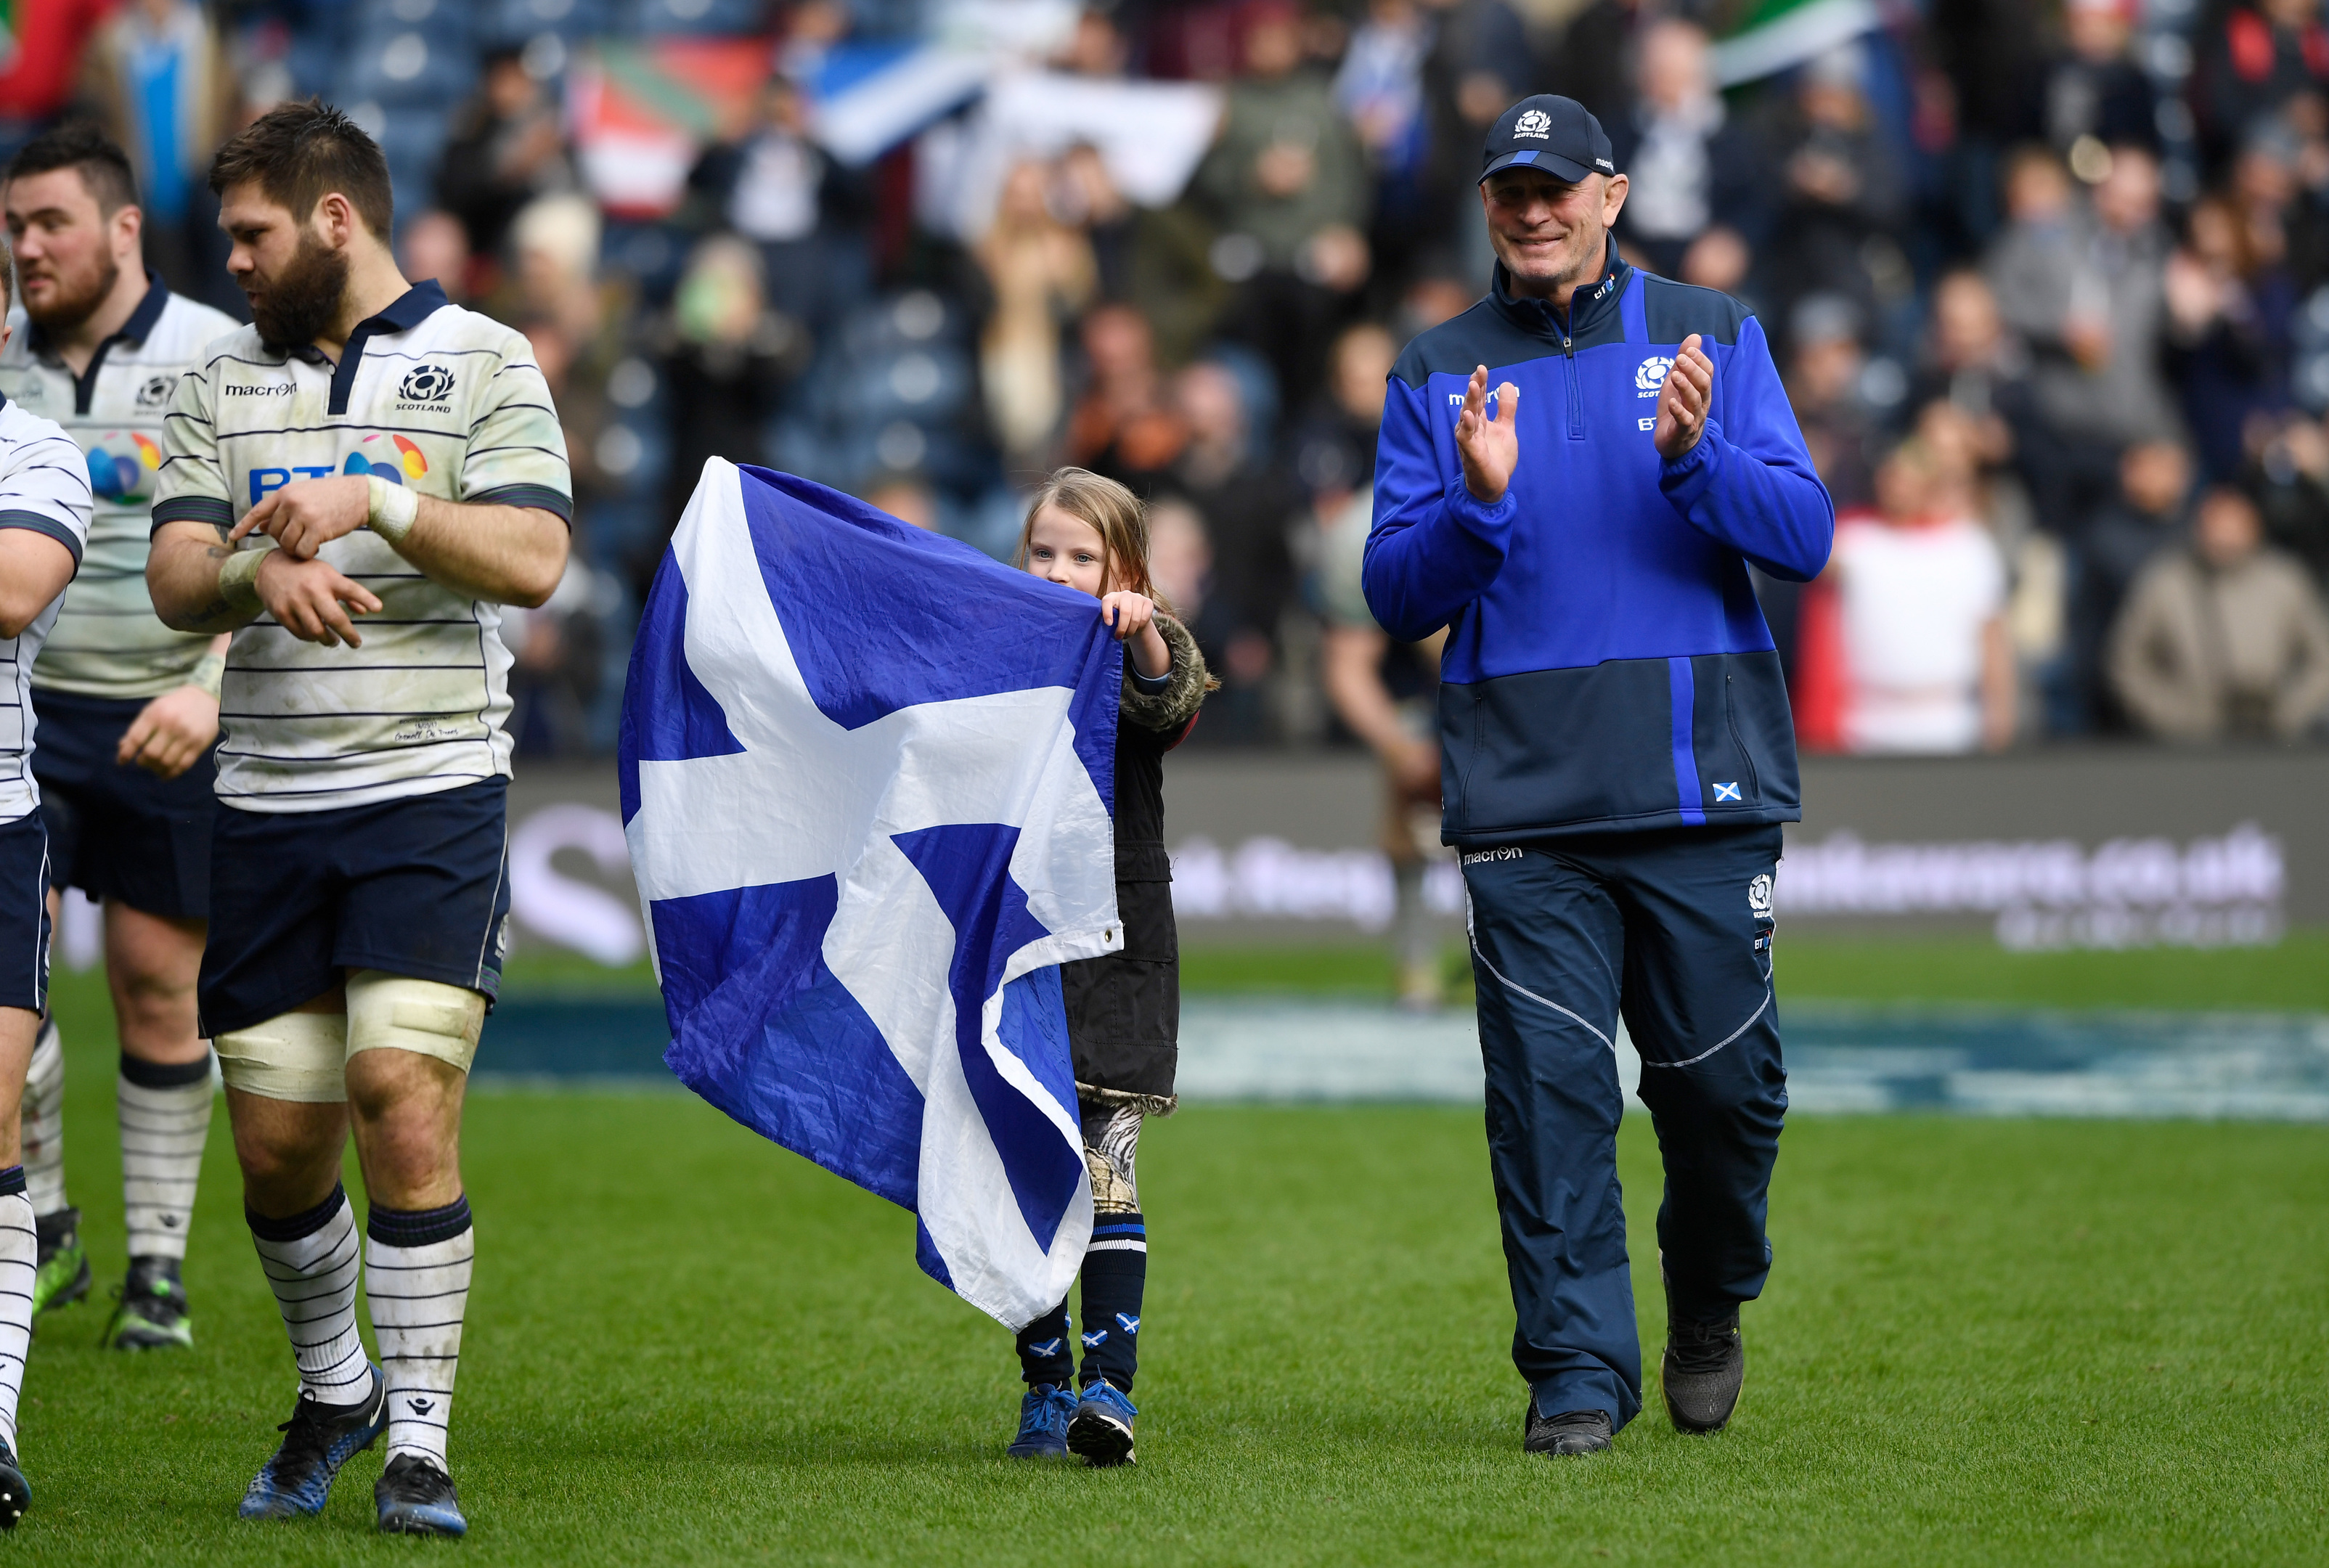 Outgoing head coach Vern Cotter and daughter Arabella (8) enjoy the applause of Scotland fans after the win over Italy.